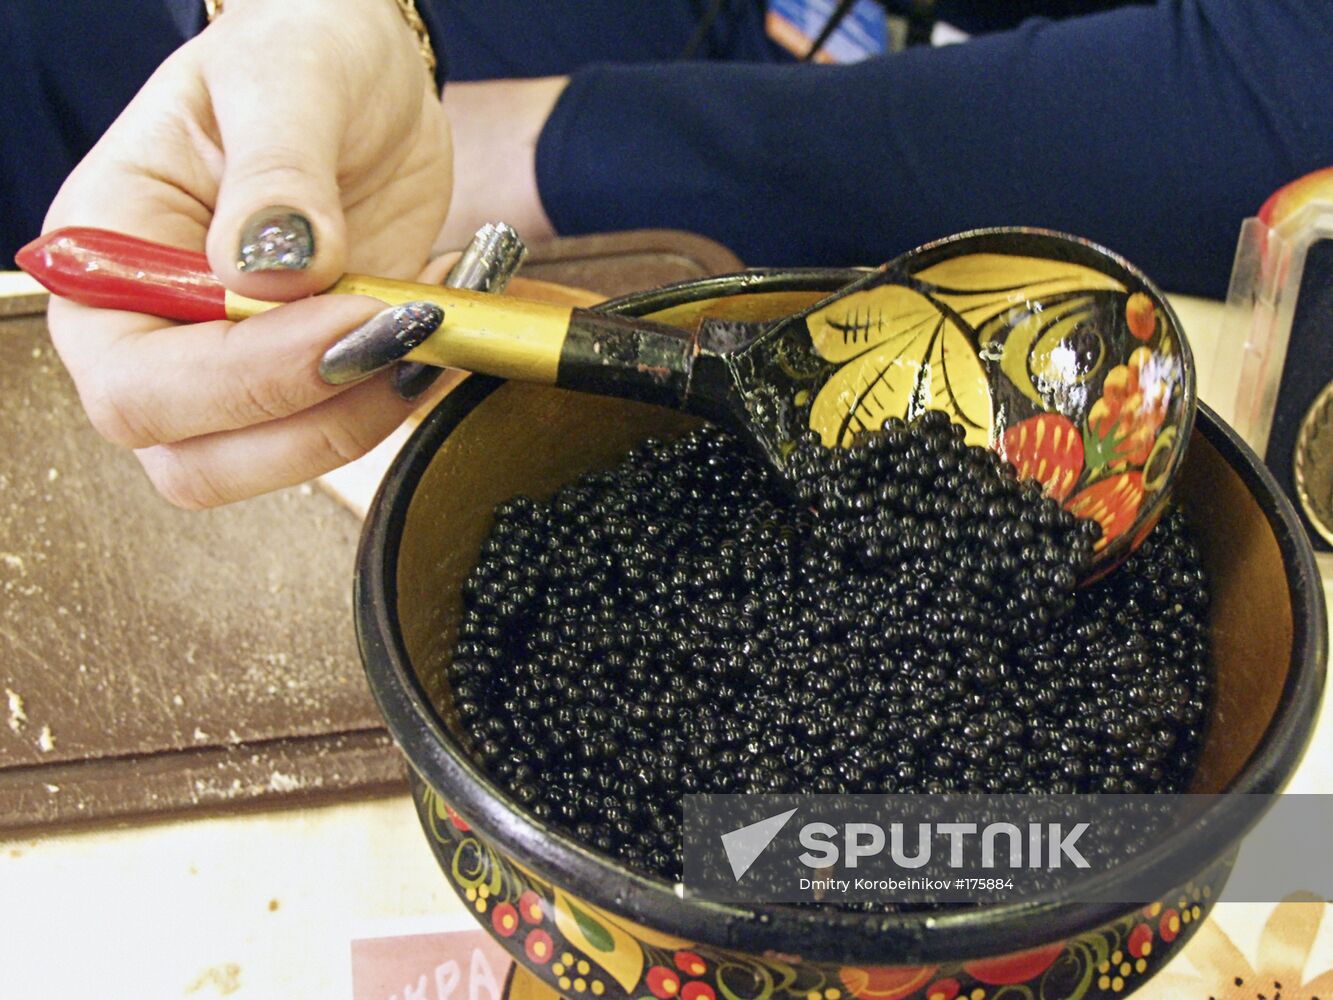 Moscow exhibition "Fish-2003" caviar